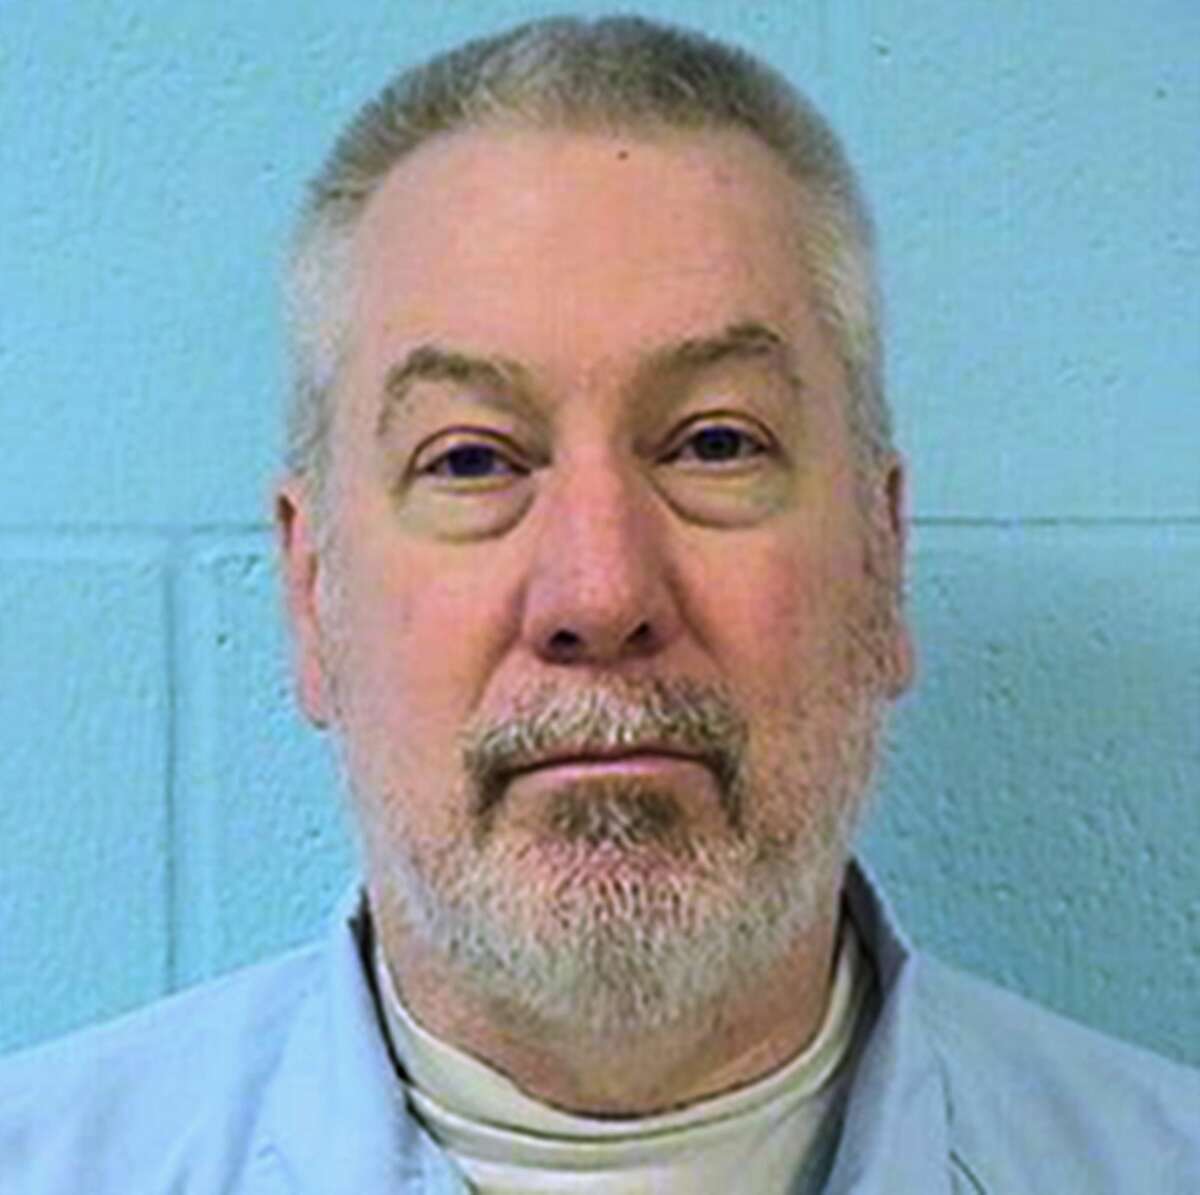 FILE - This undated photo provided by the Illinois Department of Corrections shows Drew Peterson, the former suburban Chicago police officer convicted of killing his third wife and suspected in the disappearance of his fourth. On Tuesday, March 3, 2015, Peterson is expected in court at the Randolph Couty Courthouse in Chester, Ill., for a preliminary hearing on charges that he tried to hire someone to kill the Will County prosecutor who helped put him in state prison. (AP Photo/Illinois Department of Corrections, File)